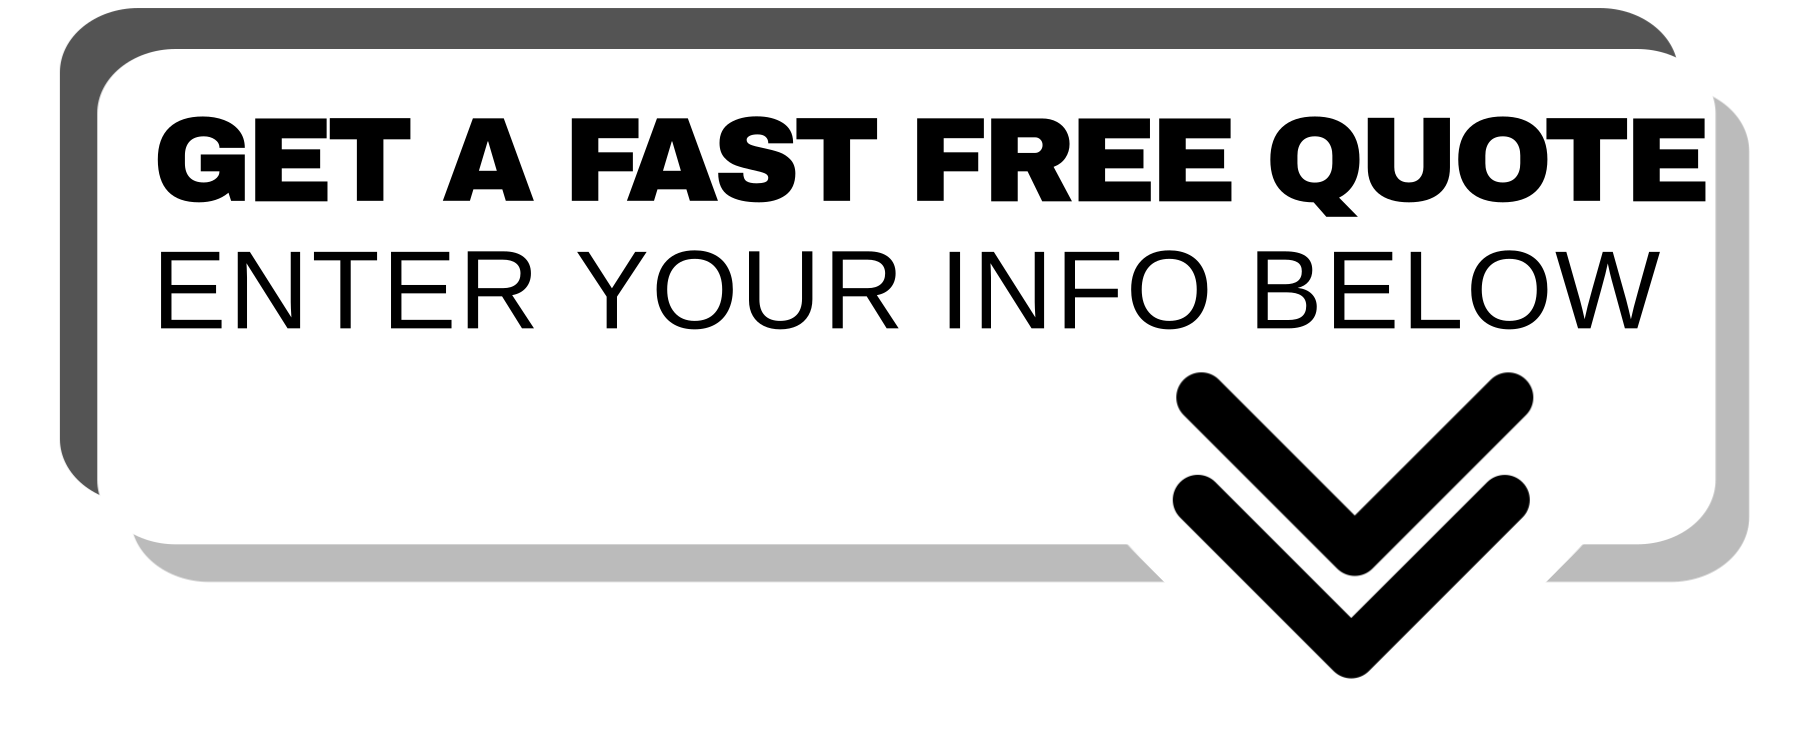 Free fast quote banner over contact form